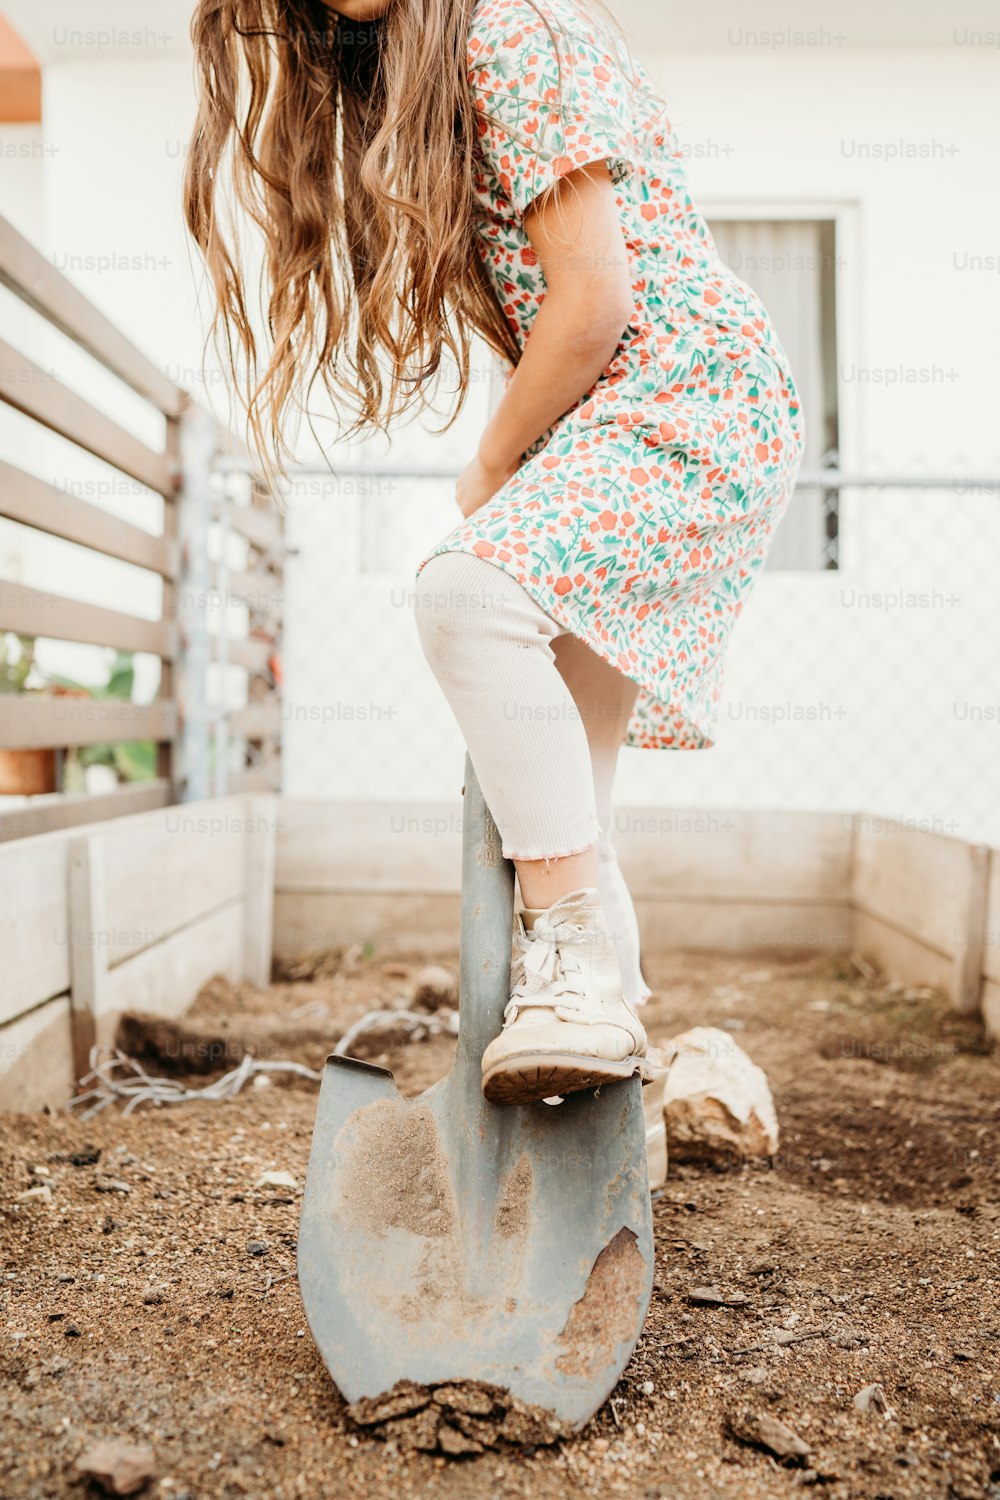 a young girl riding on top of a metal shovel